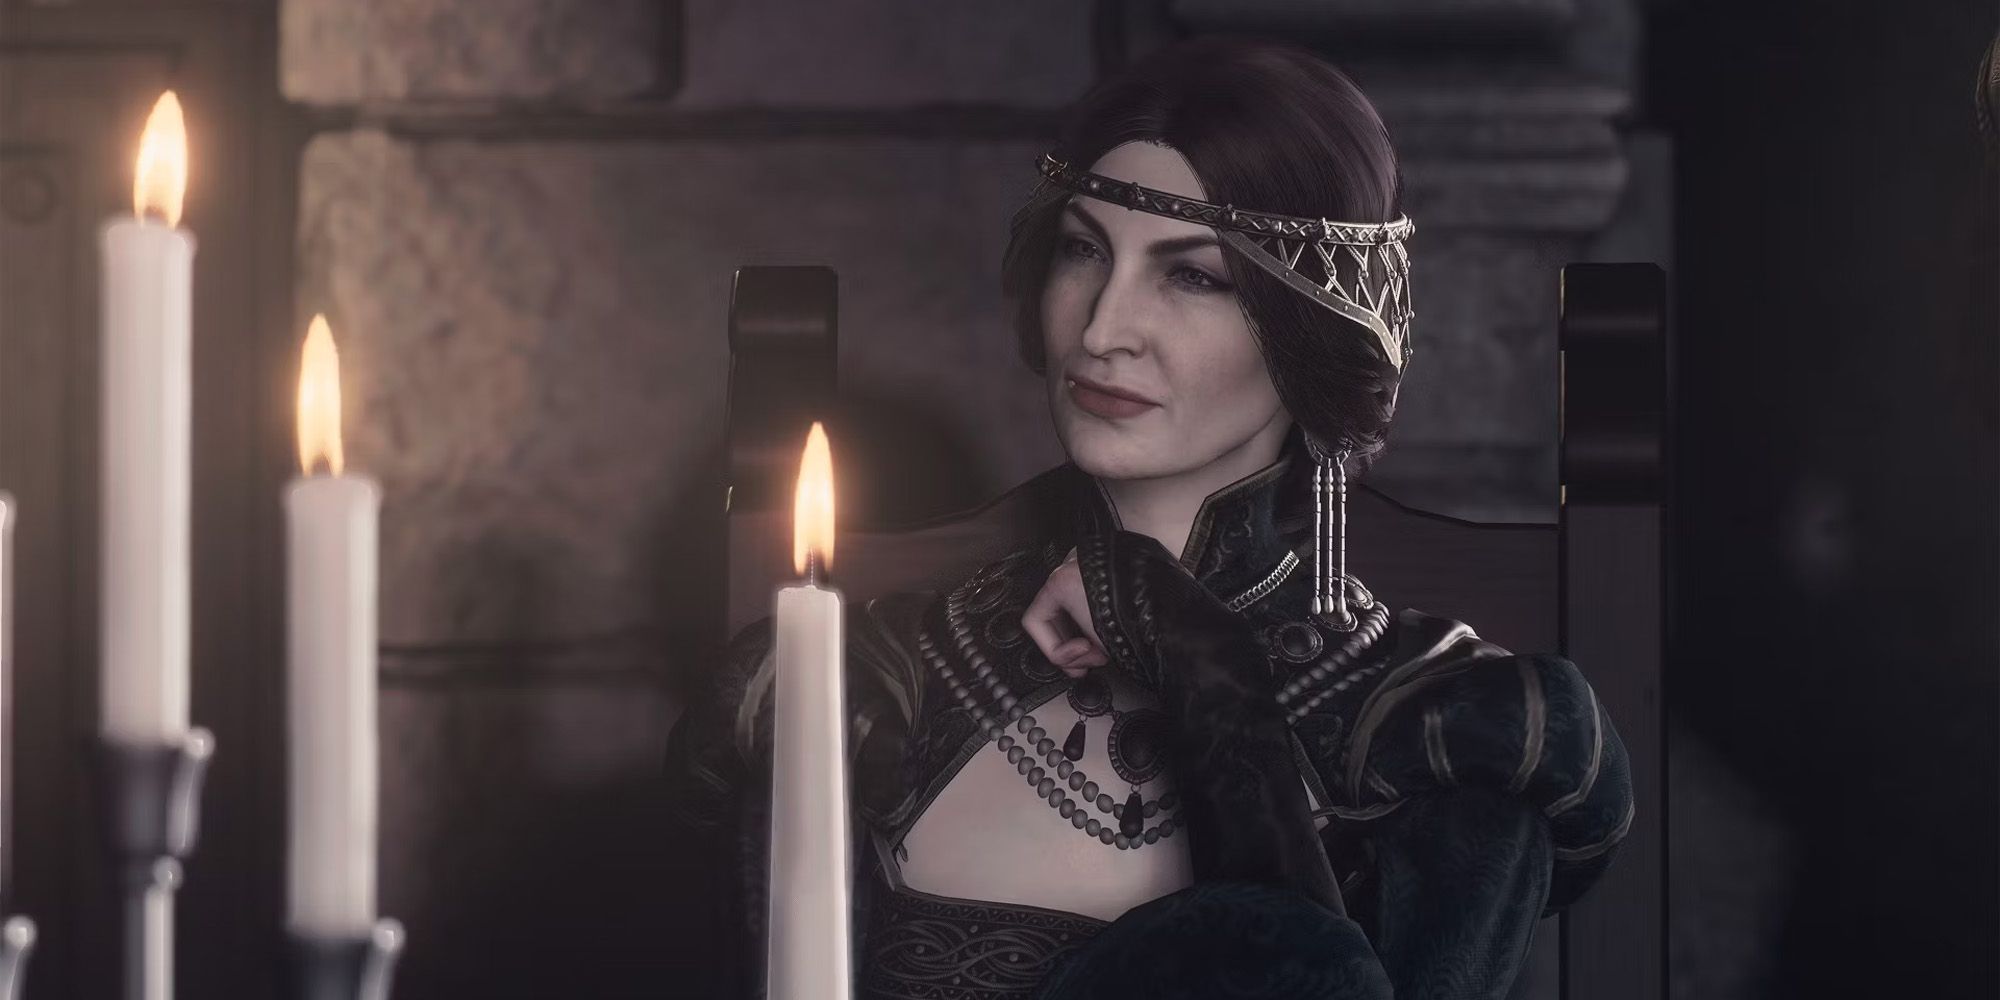 Dragon's Dogma 2 Disa, a somewhat sinister looking woman in a decorative metal headband and fancy black dress sits at a table in front of candles looking contemplative.